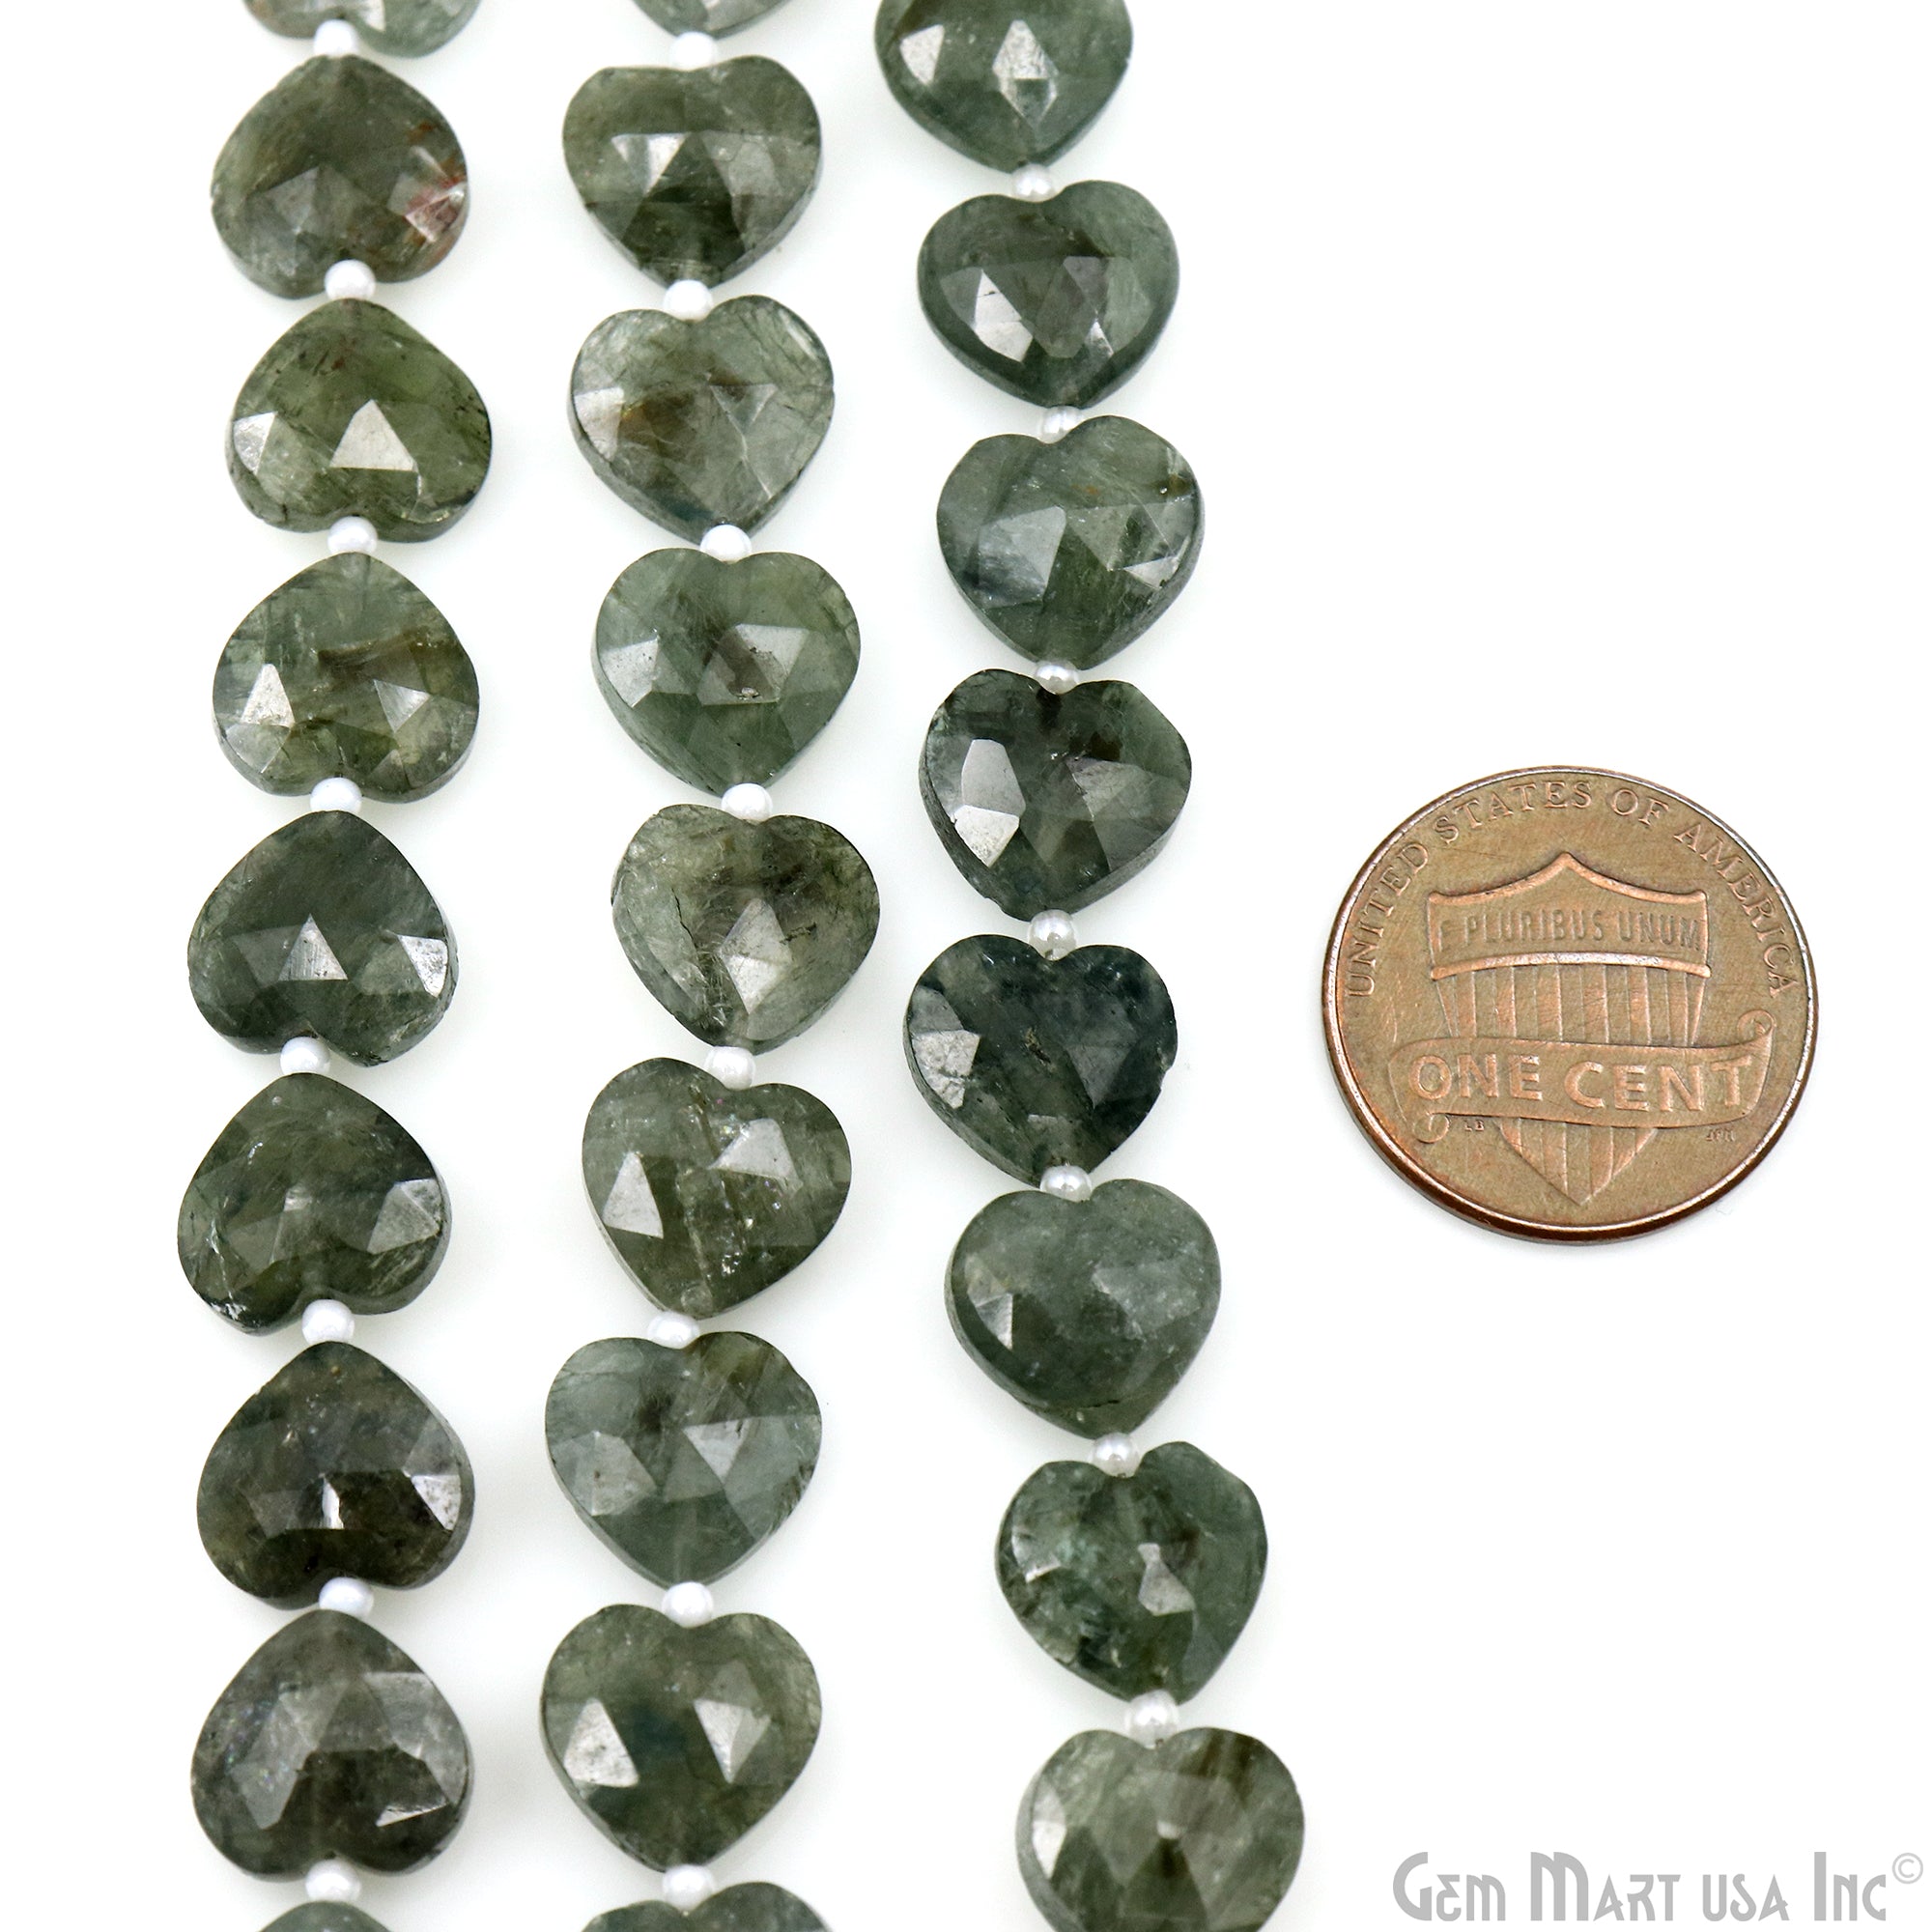 Green Apatite Faceted Heart Shape 10mm Beads Gemstone 7 Inch Strands Briolette Drops